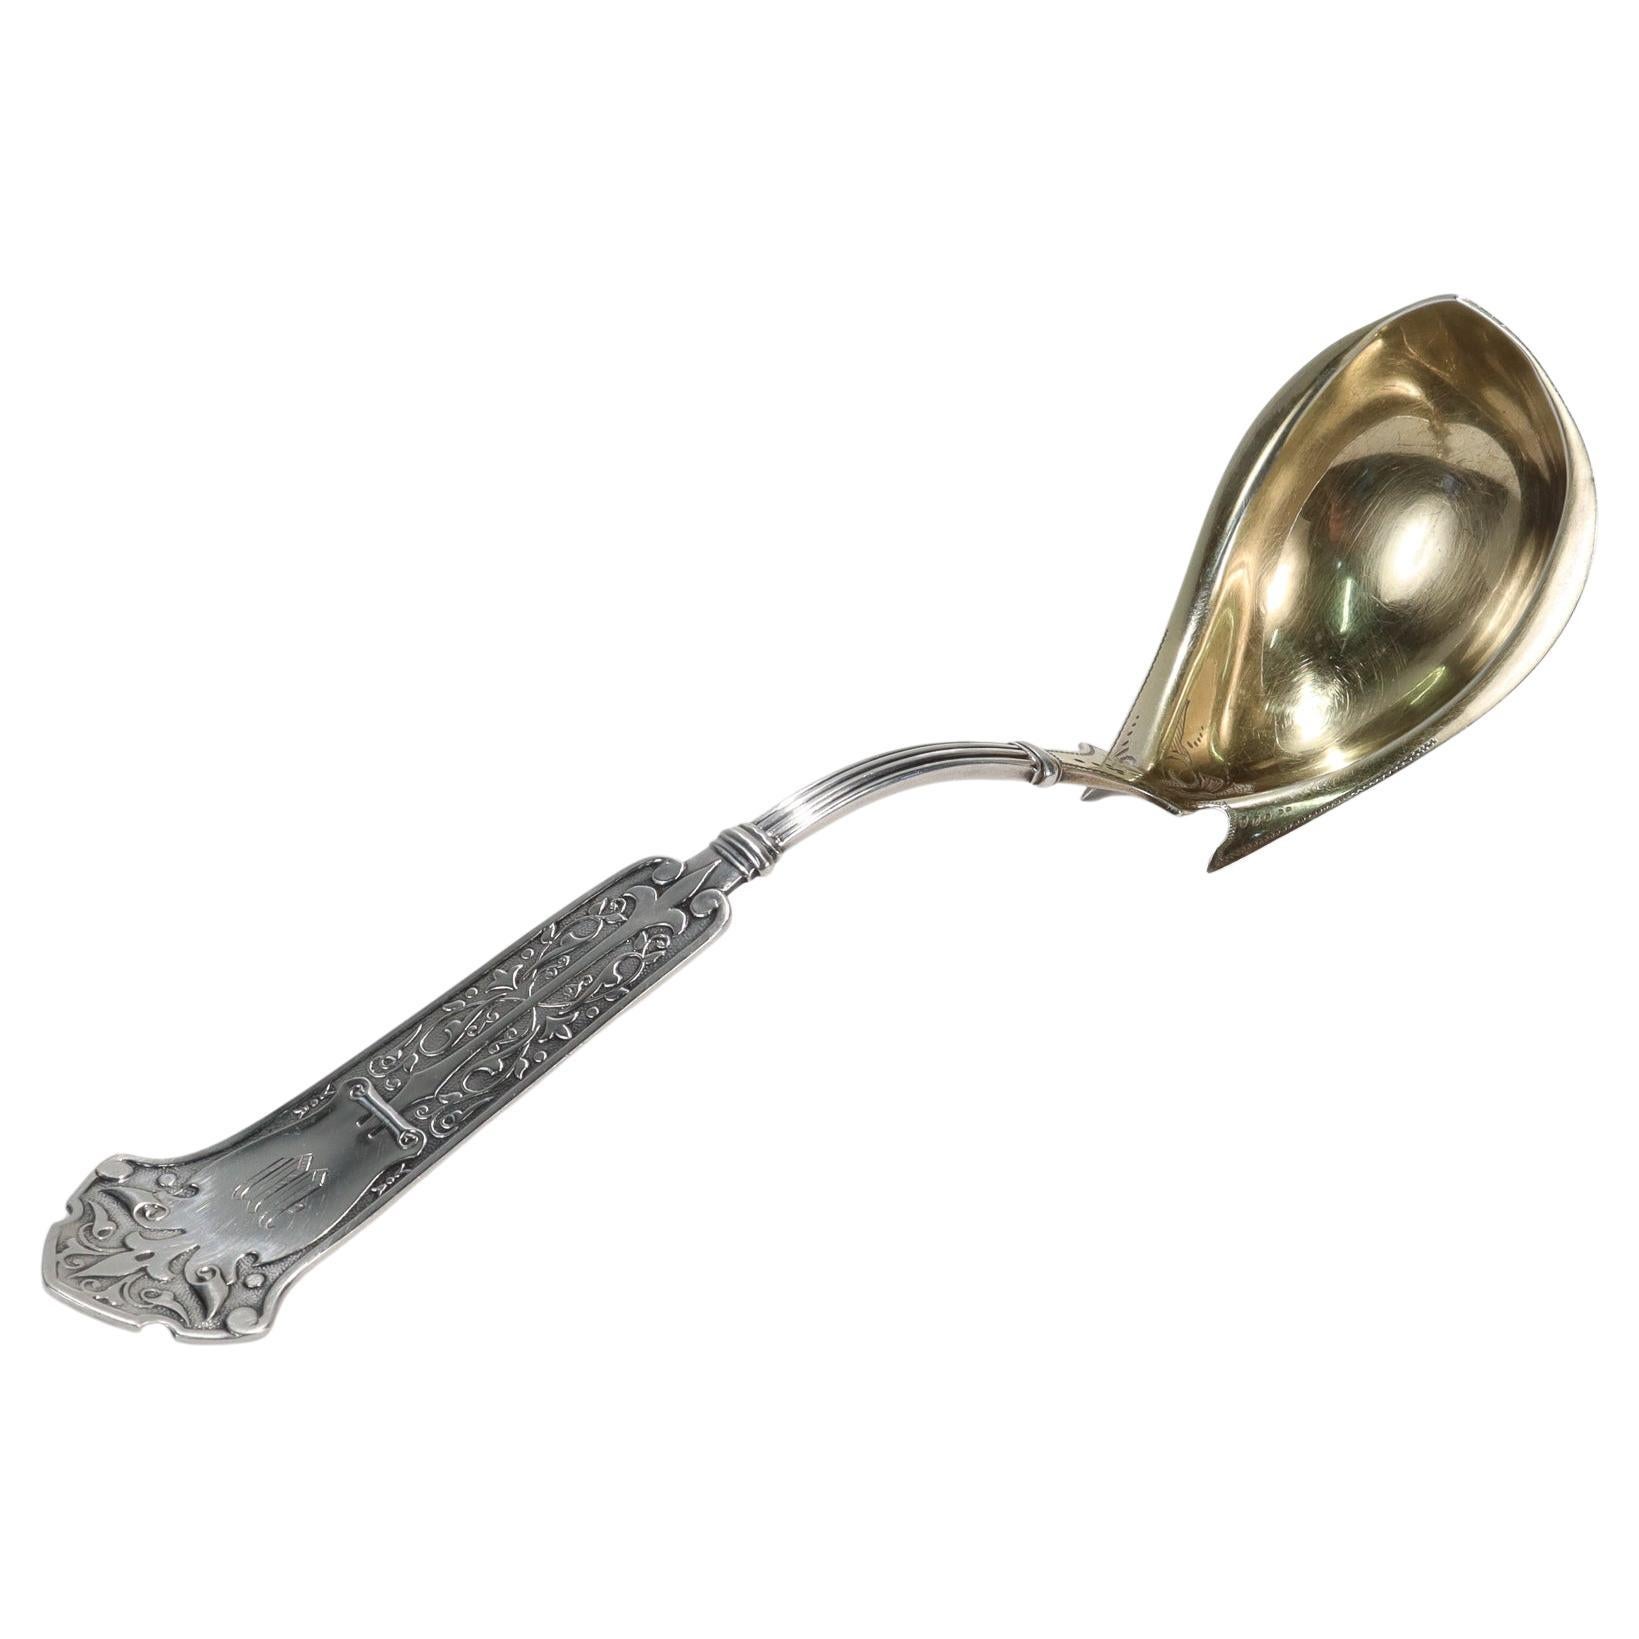 Antique George Sharp Arabesque Pattern Coin Silver Ladle For Sale